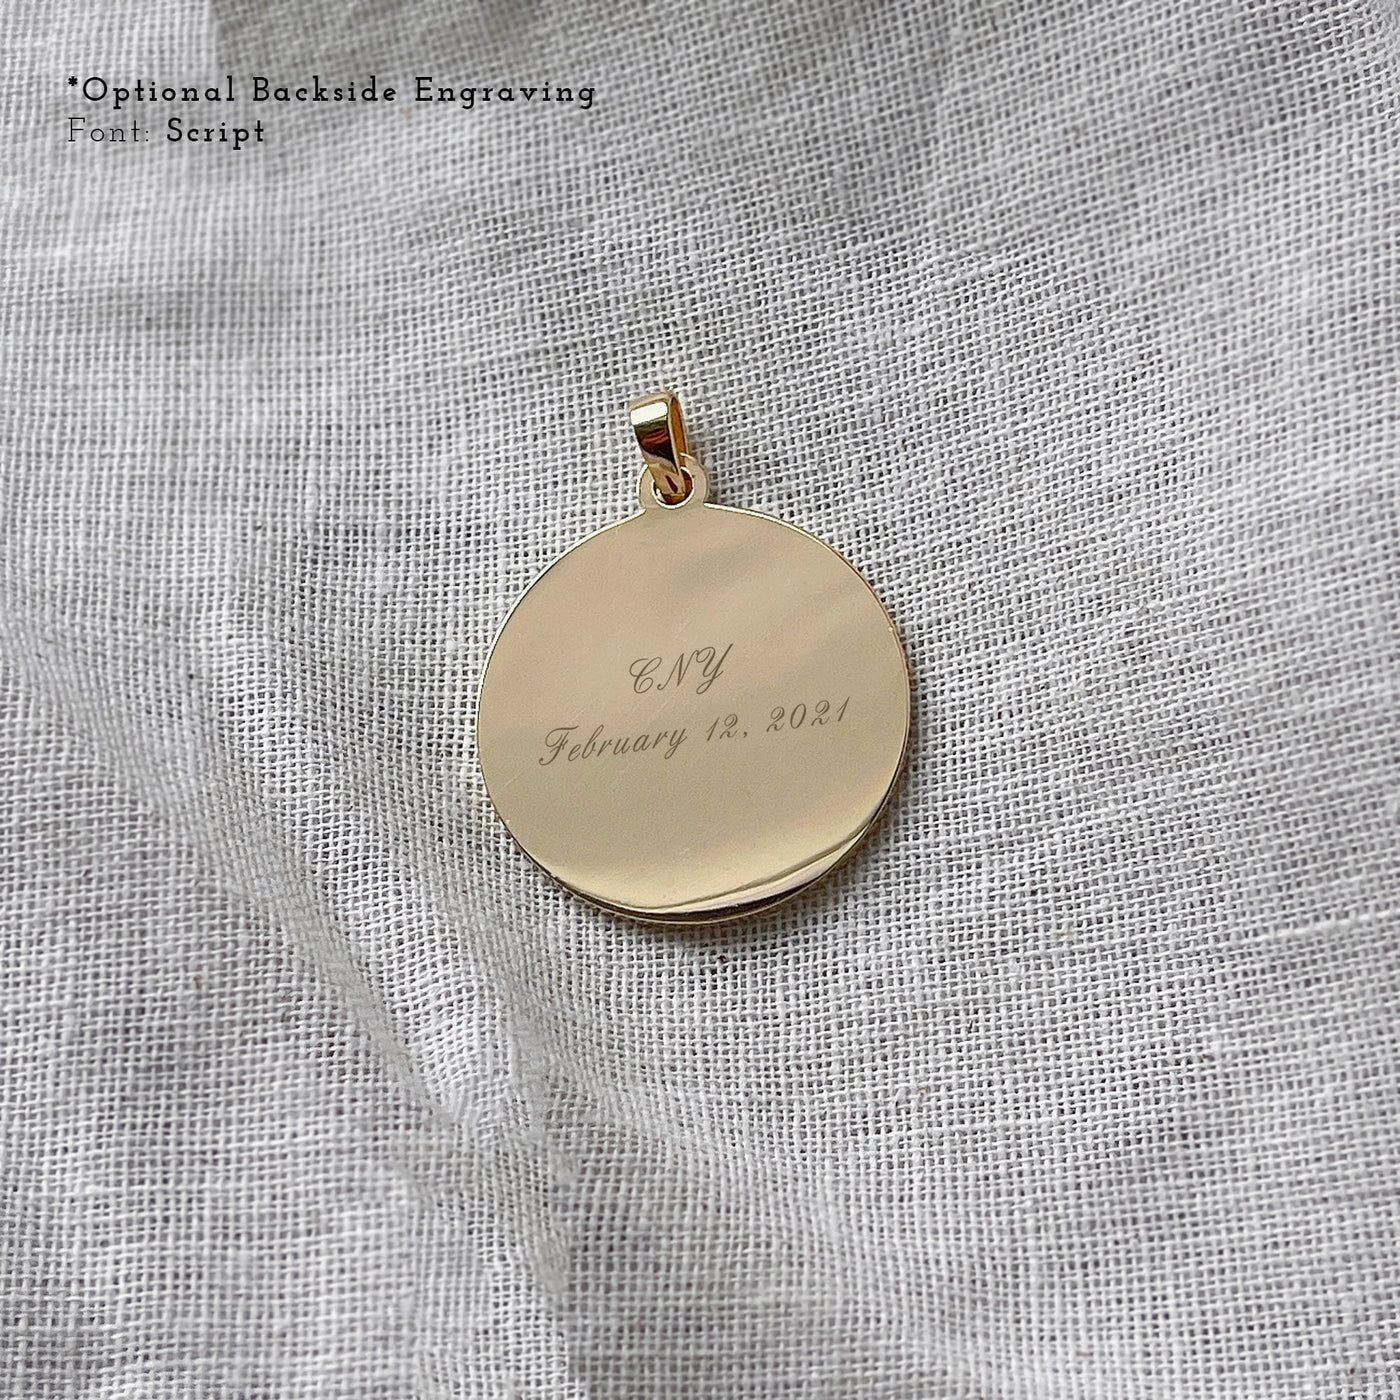 Year of The Pig (豬) Lunar Zodiac Coin Pendant